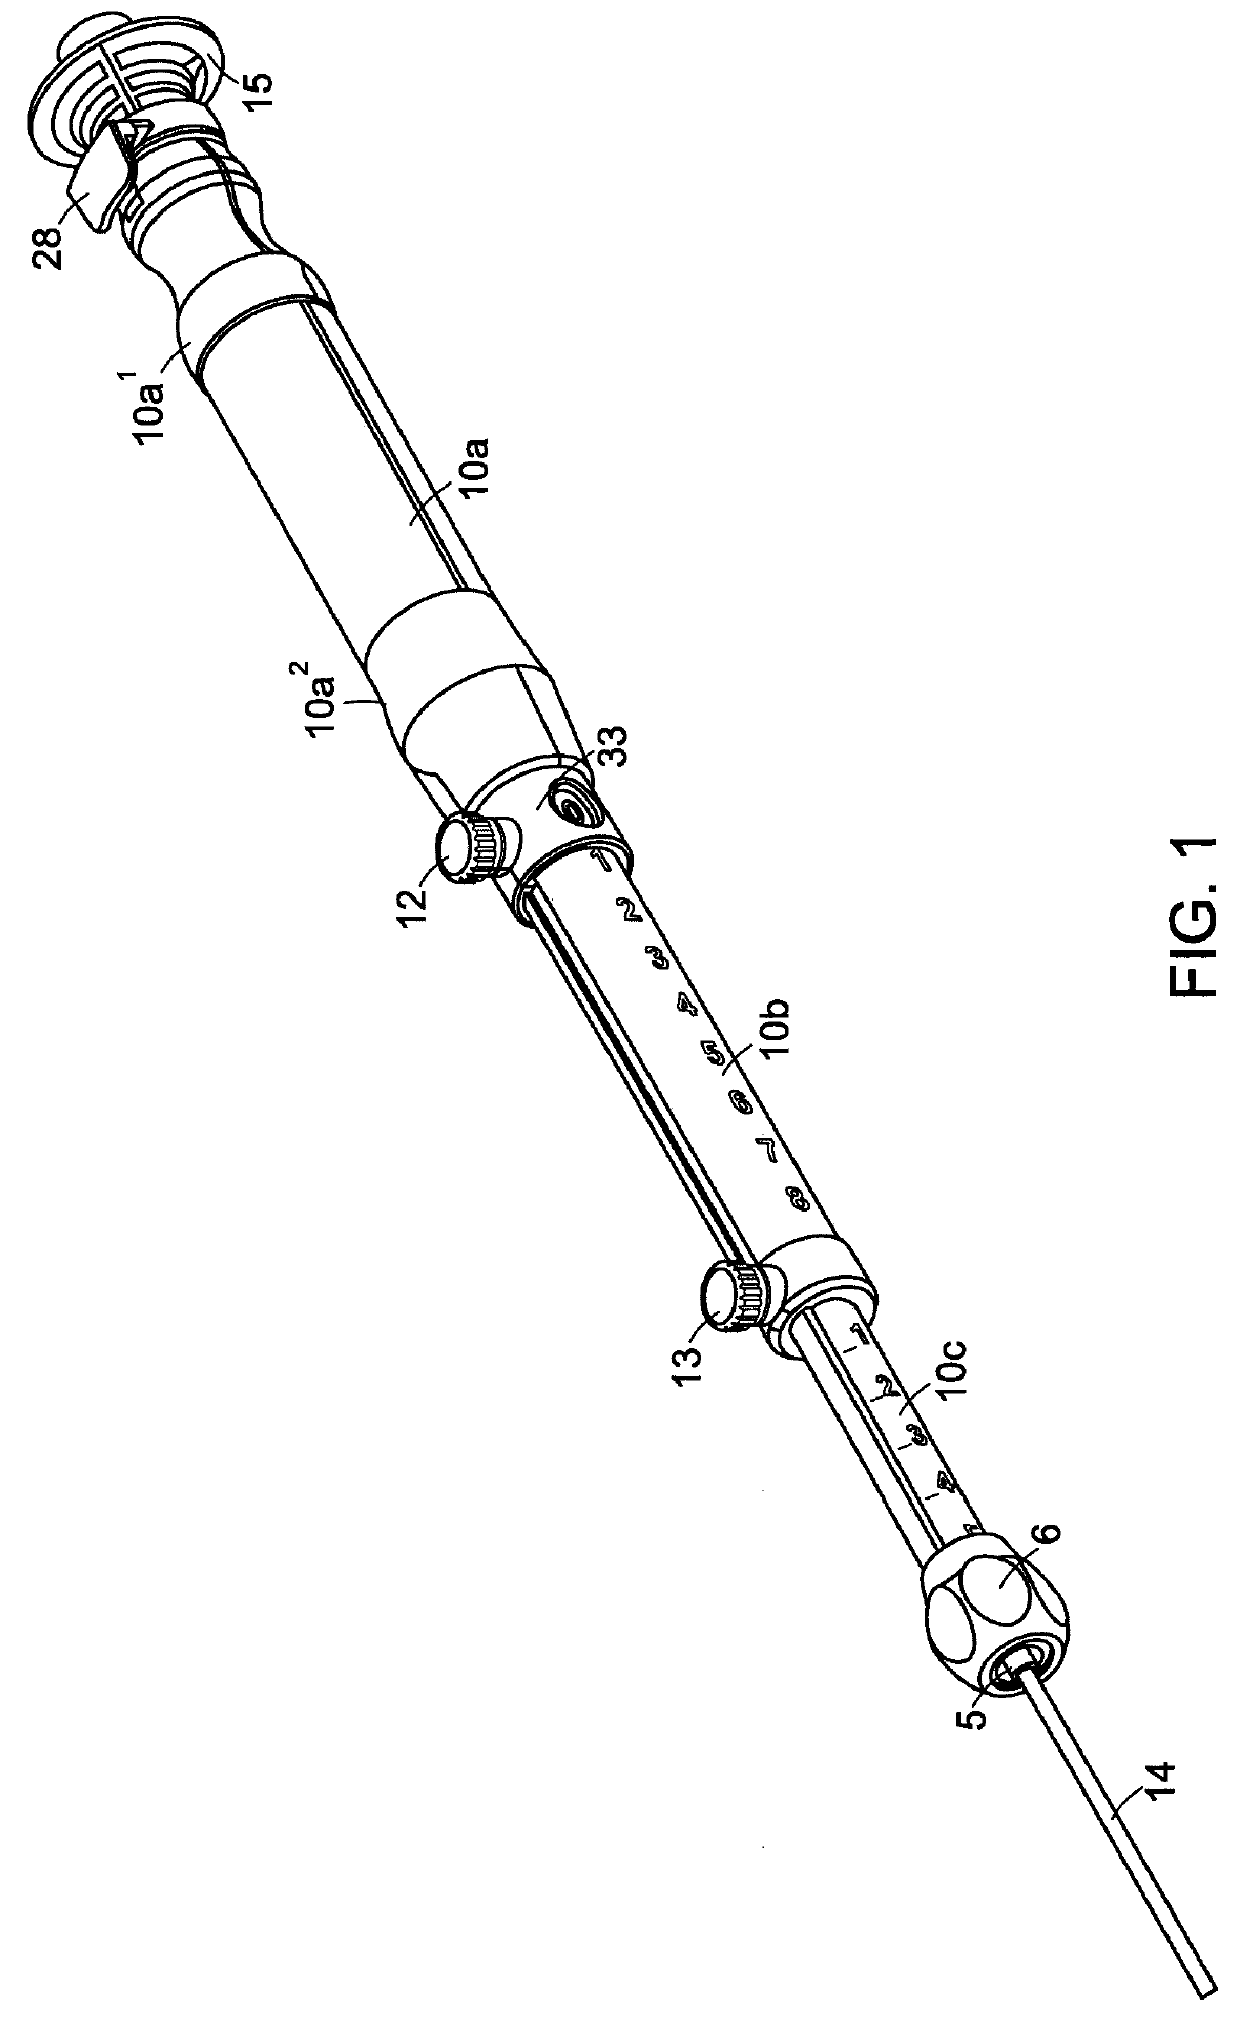 Needle biopsy device with exchangeable needle and integrated needle protection